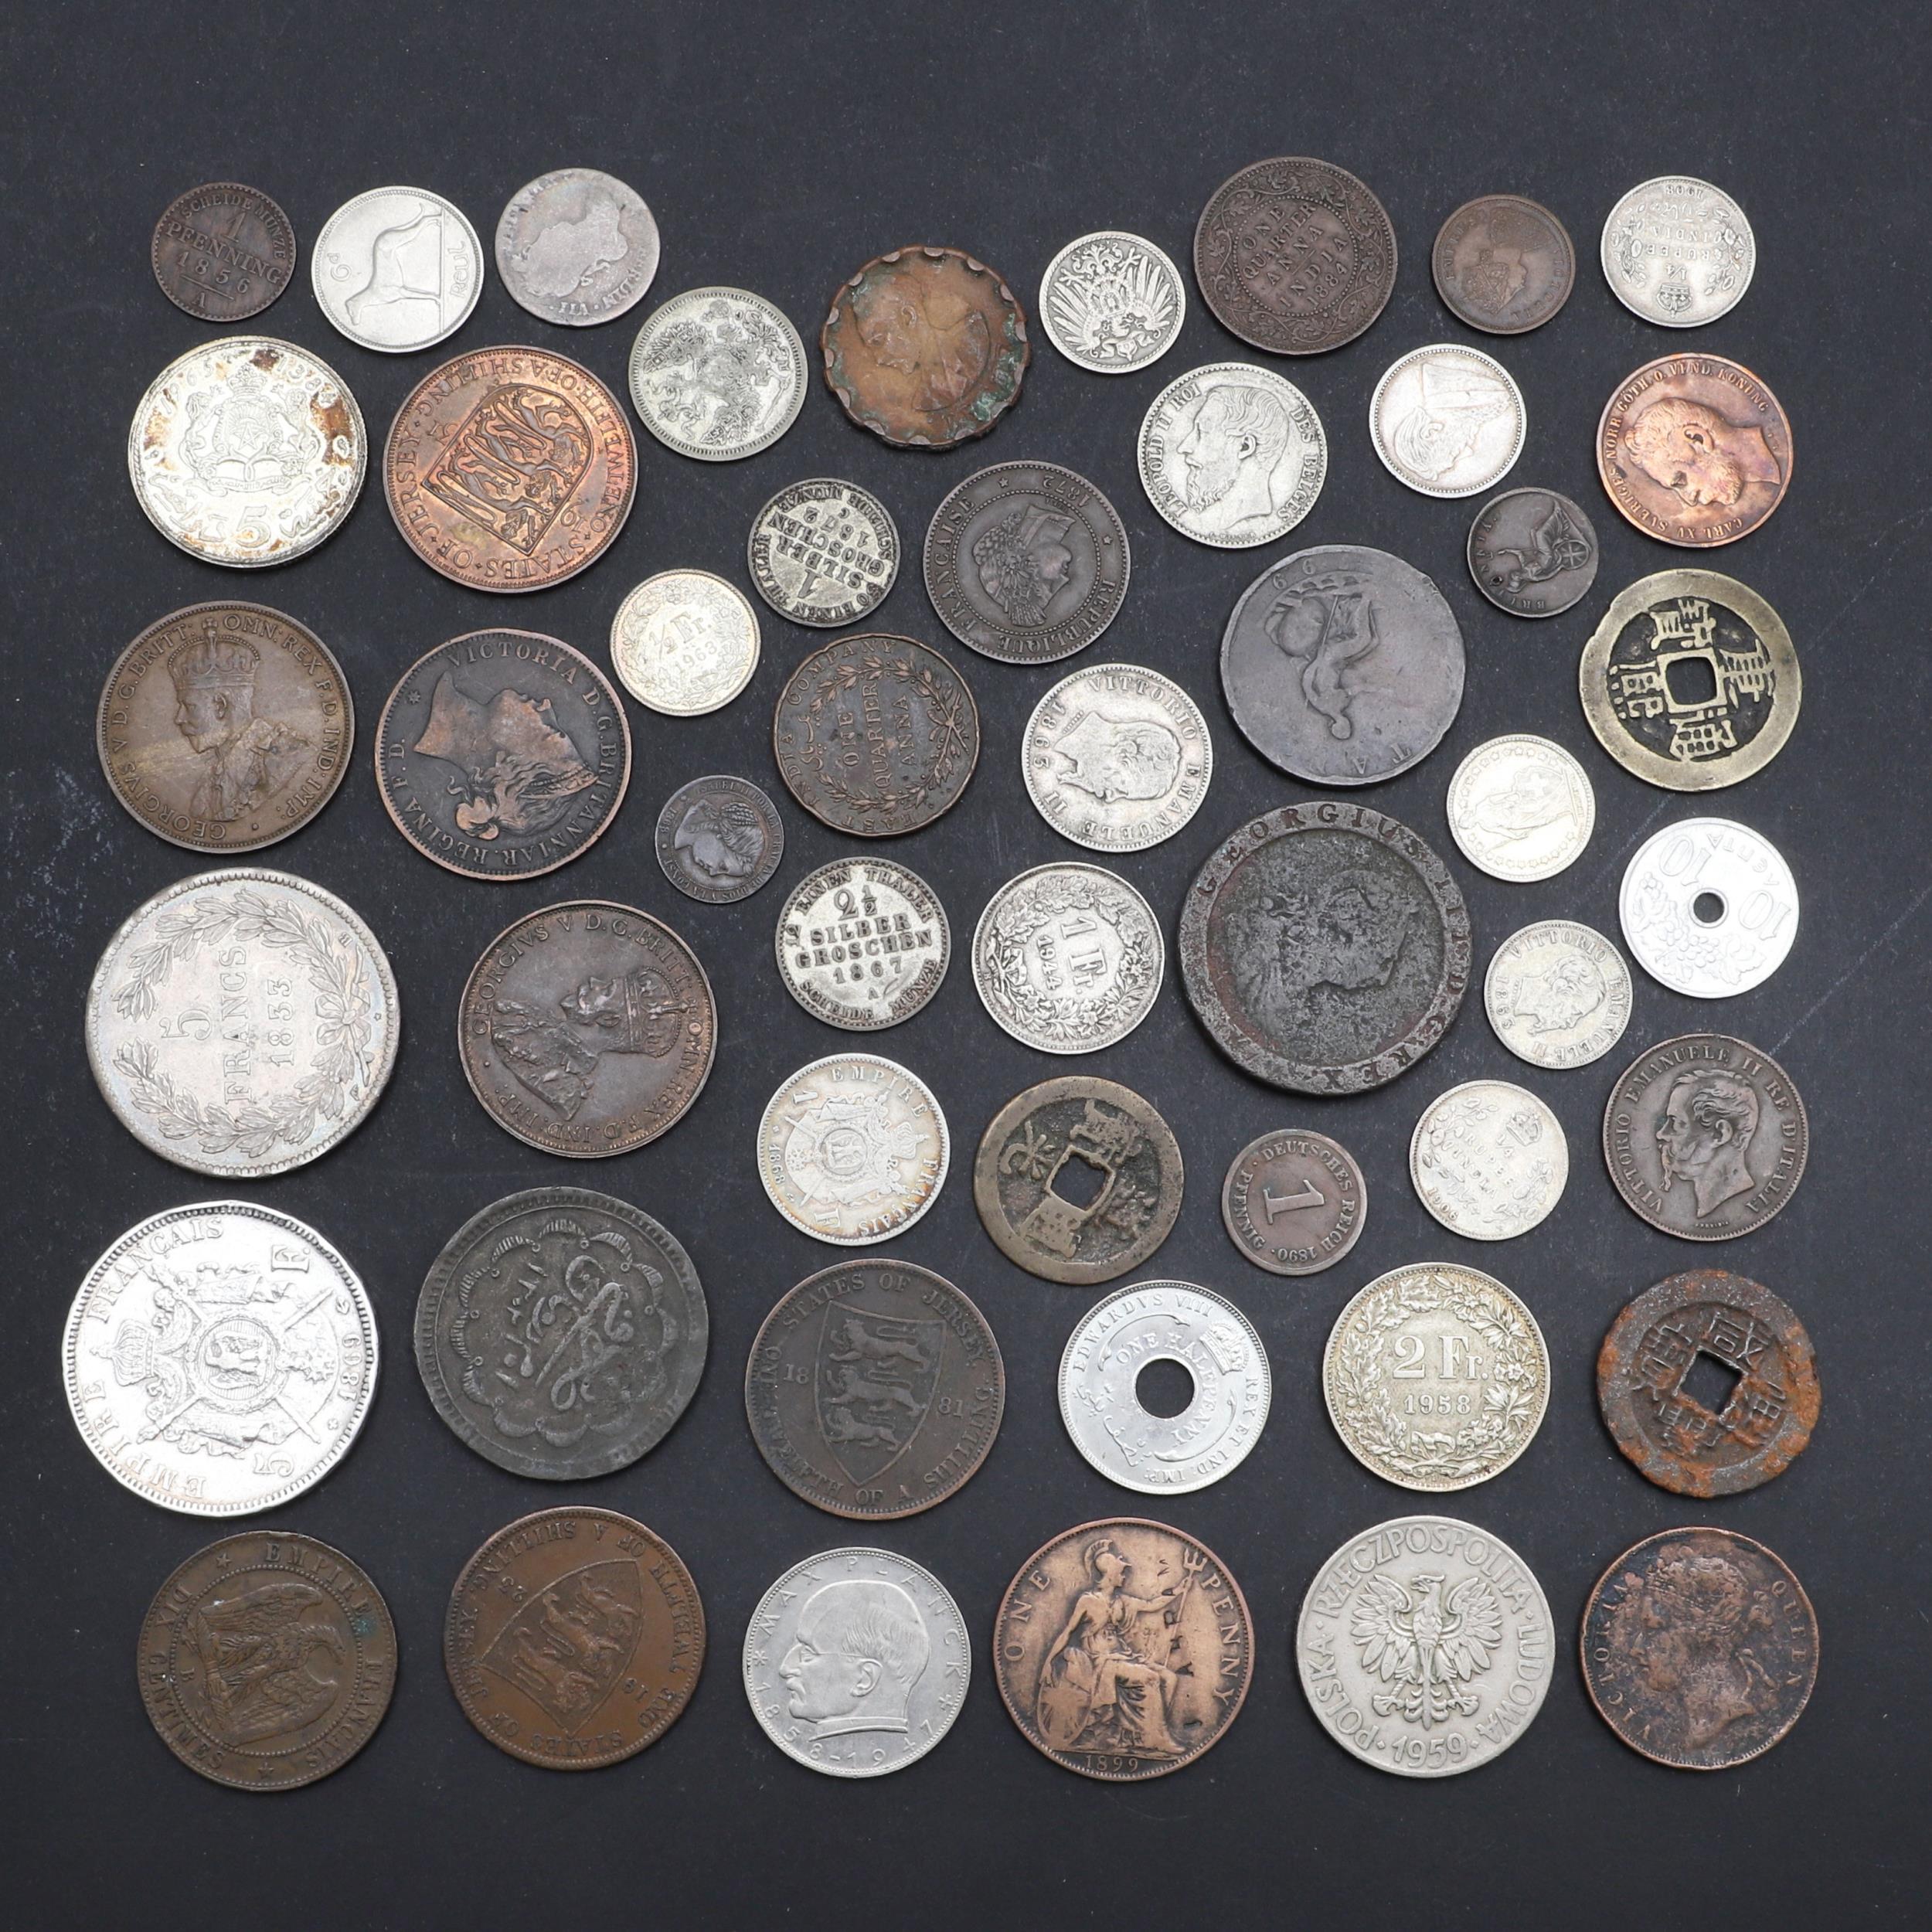 A COLLECTION OF WORLD COINS INCLUDING A NAPOLEON III 5 FRANC COIN.